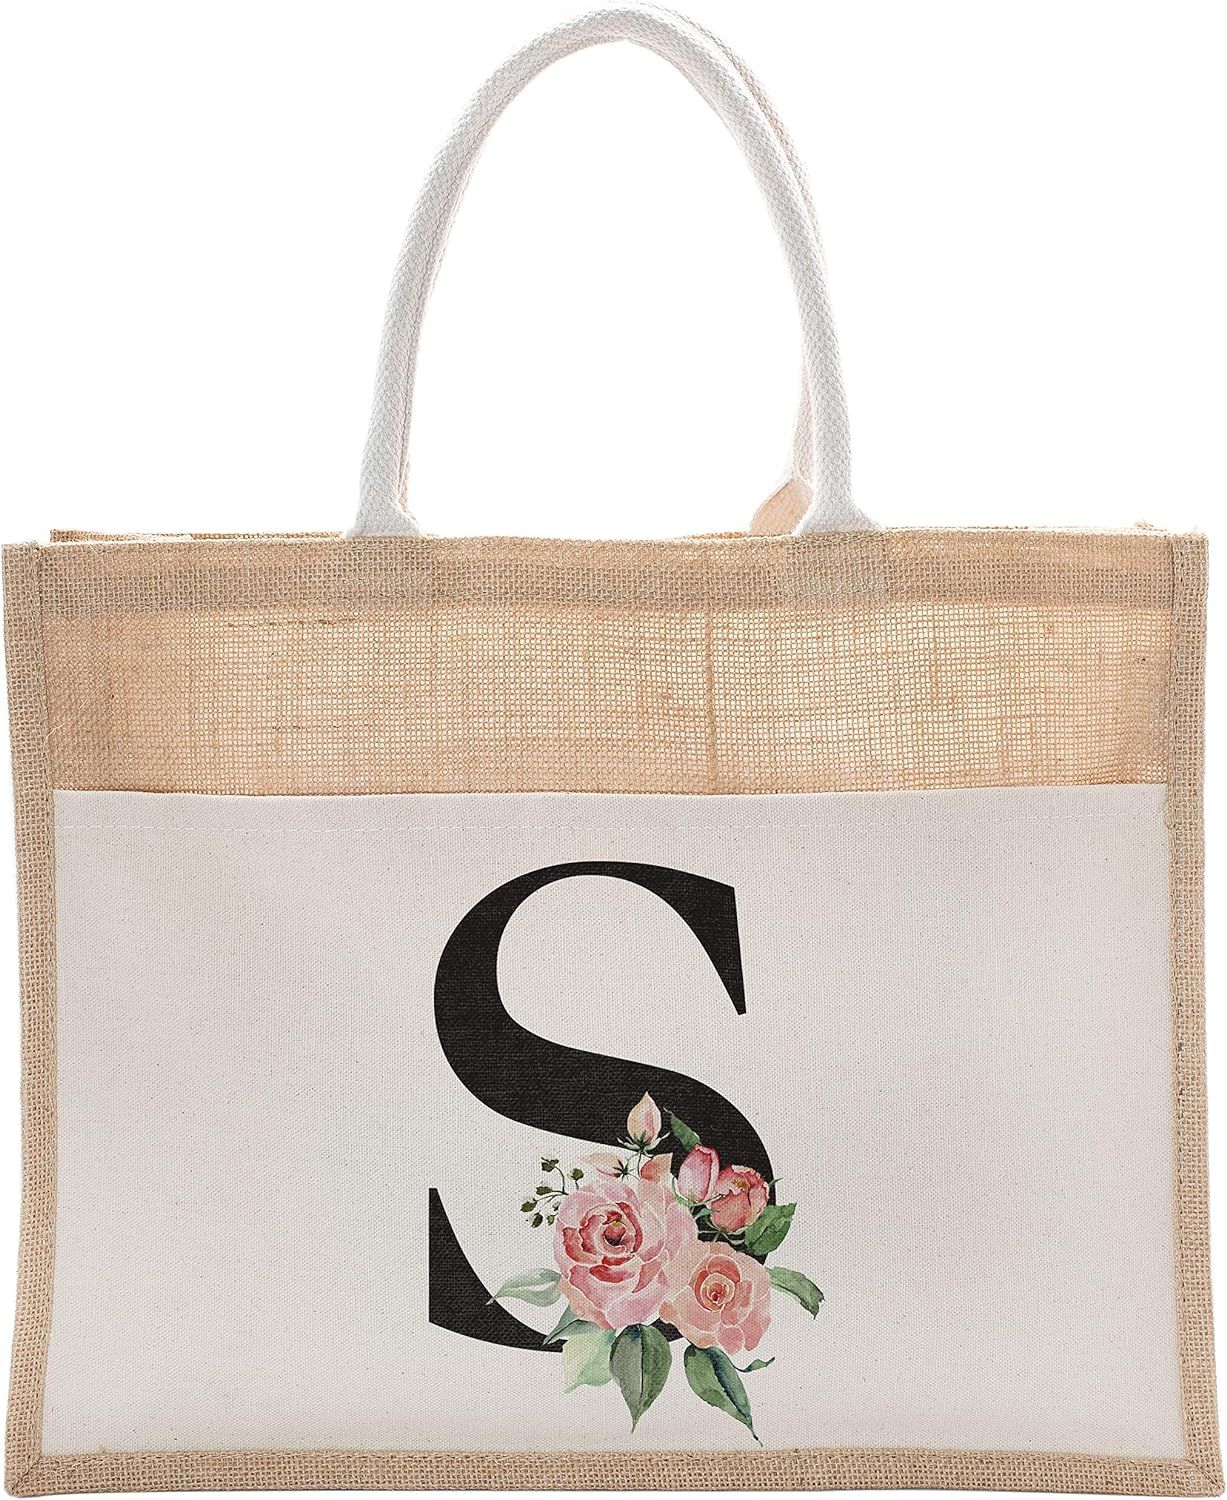 Daily Use Canvas Tote Bag With Floral Initial For Beach Workout Yoga Vacation #2 | Amazon (US)